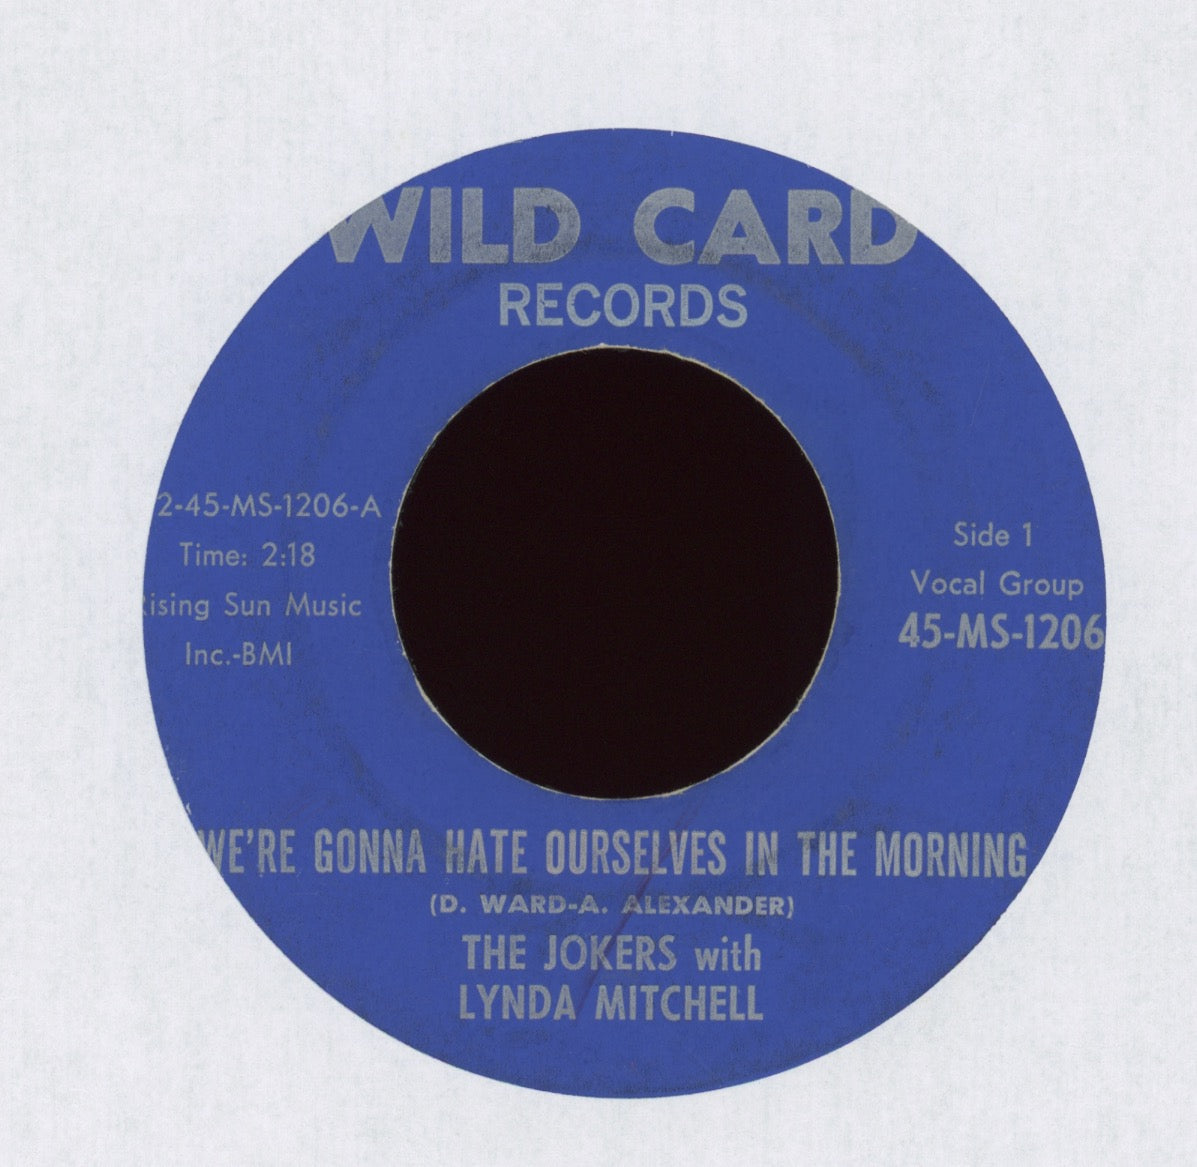 The Jokers with Lynda Mitchell - We're Gonna Hate Ourselves in the Morning on Wild Card Mod Rock 45